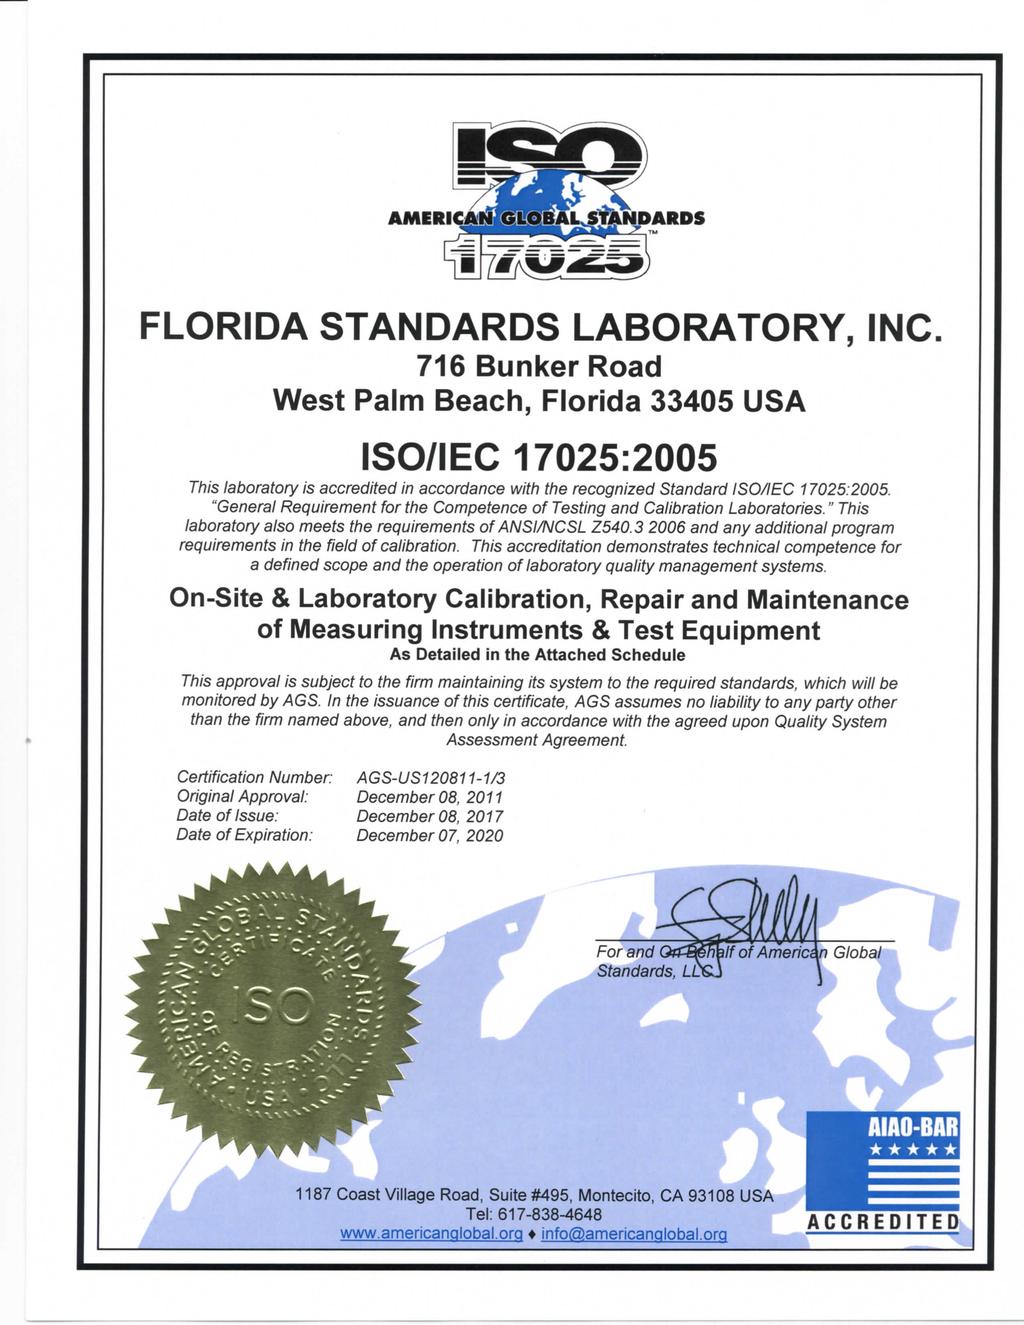 AMERI NDARPS FLORIDA STANDARDS LABORATORY, INC 716 Bunker Road West Palm Beach, Florida 33405 USA ISO/IEC 17025:2005 This laboratory Is accredited in accordance with the recognized Standard ISO/IEC